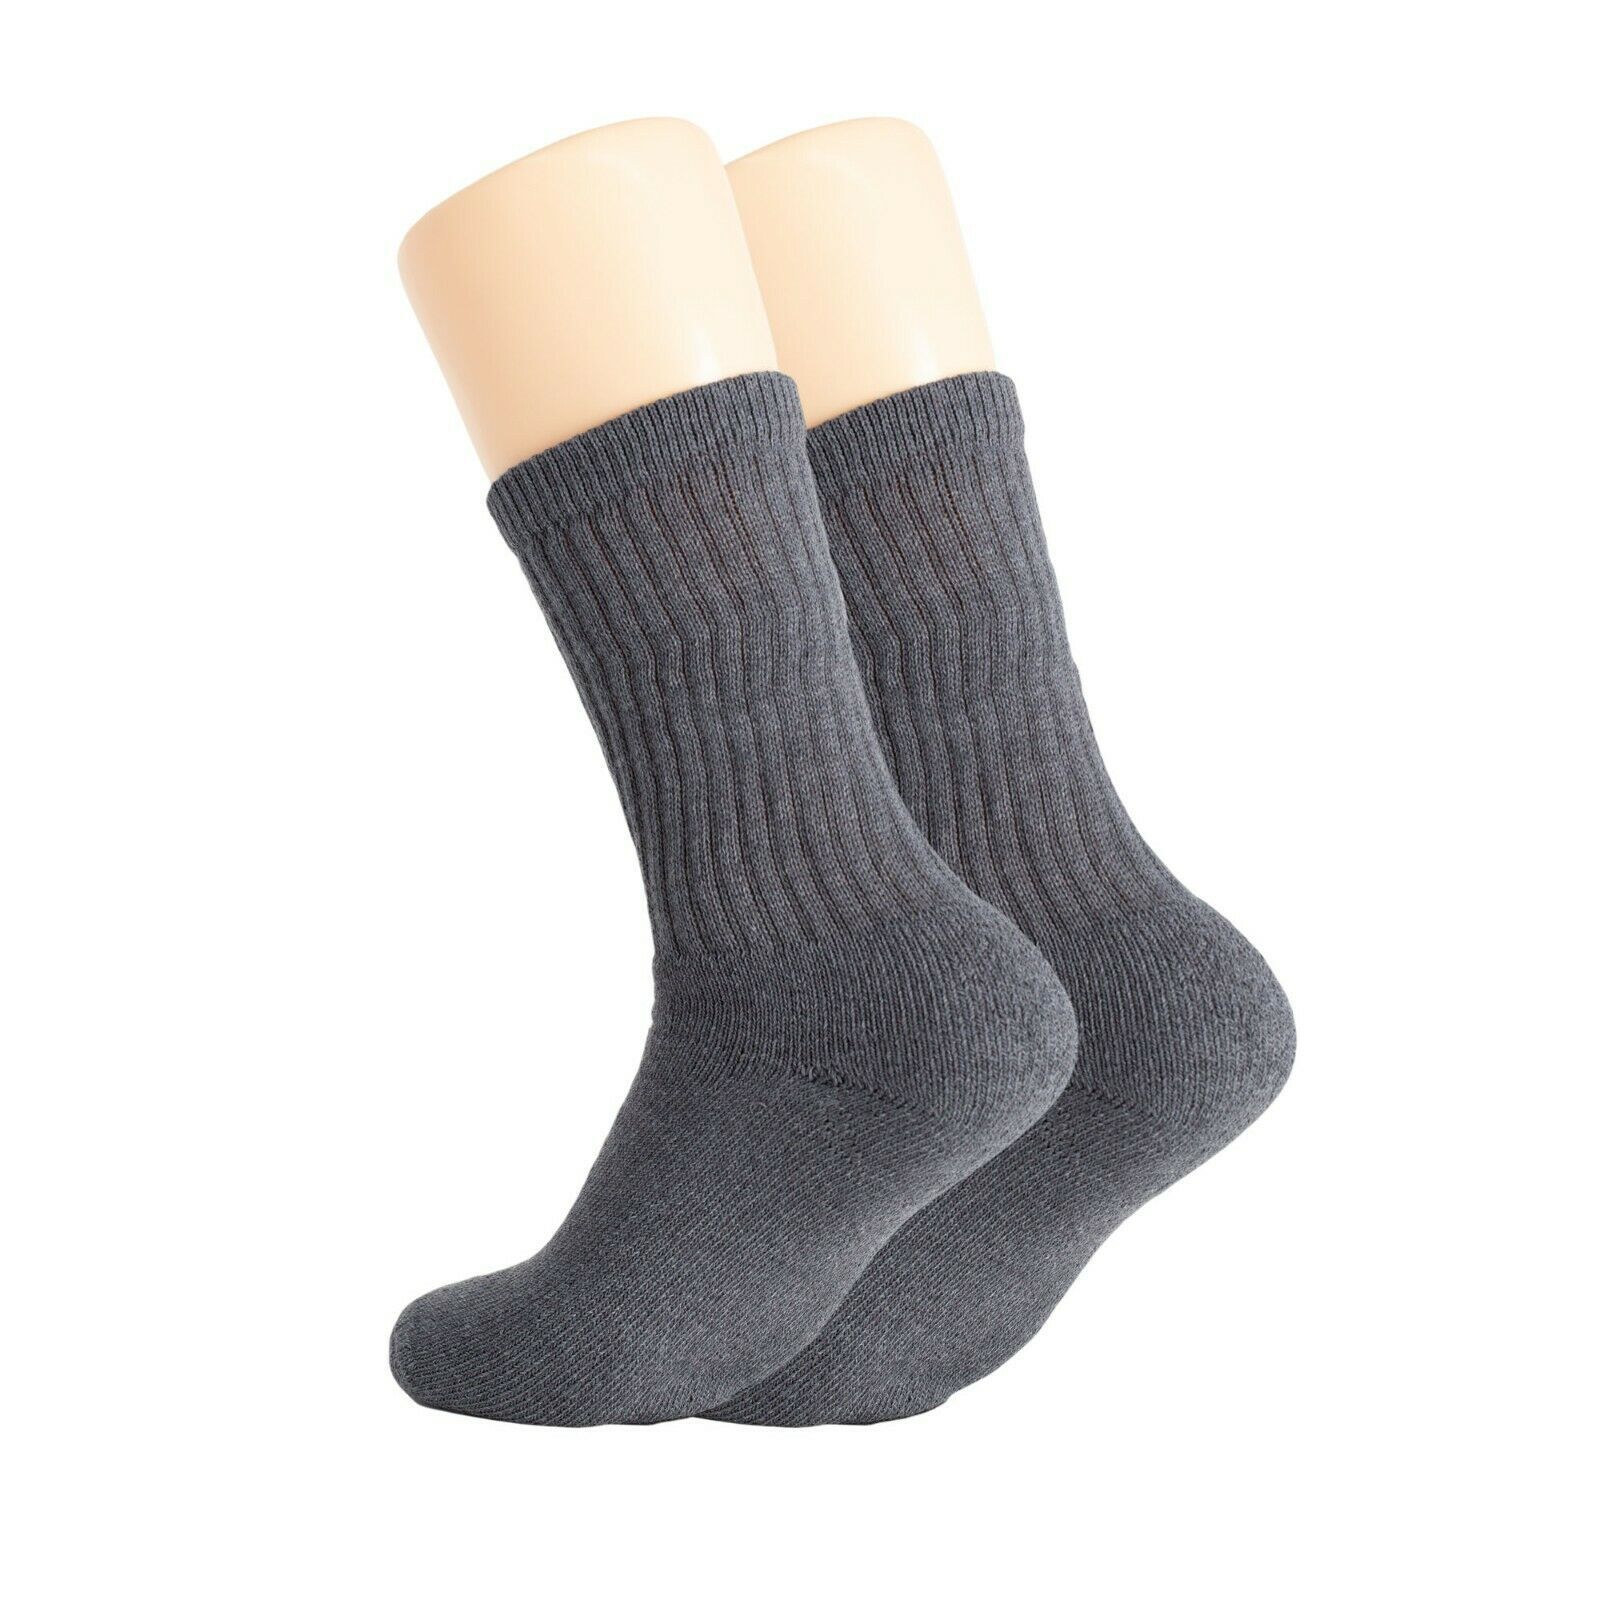 Solid Cotton Cushion Crew Socks for Women and Men